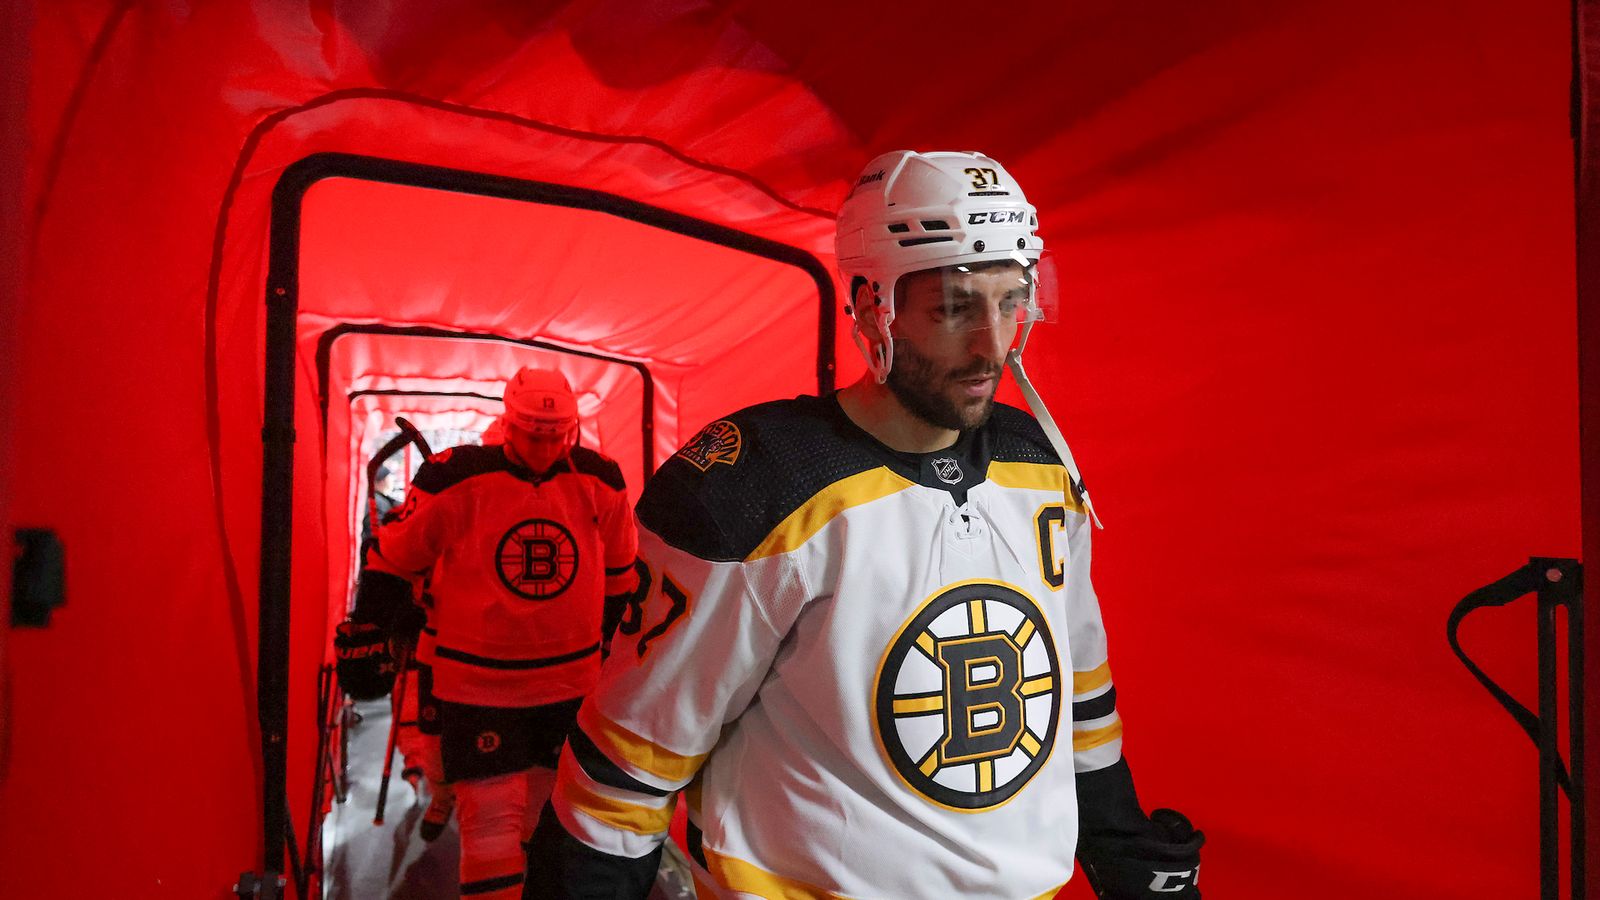 Protecting Patrice Bergeron should be a focus for Bruins